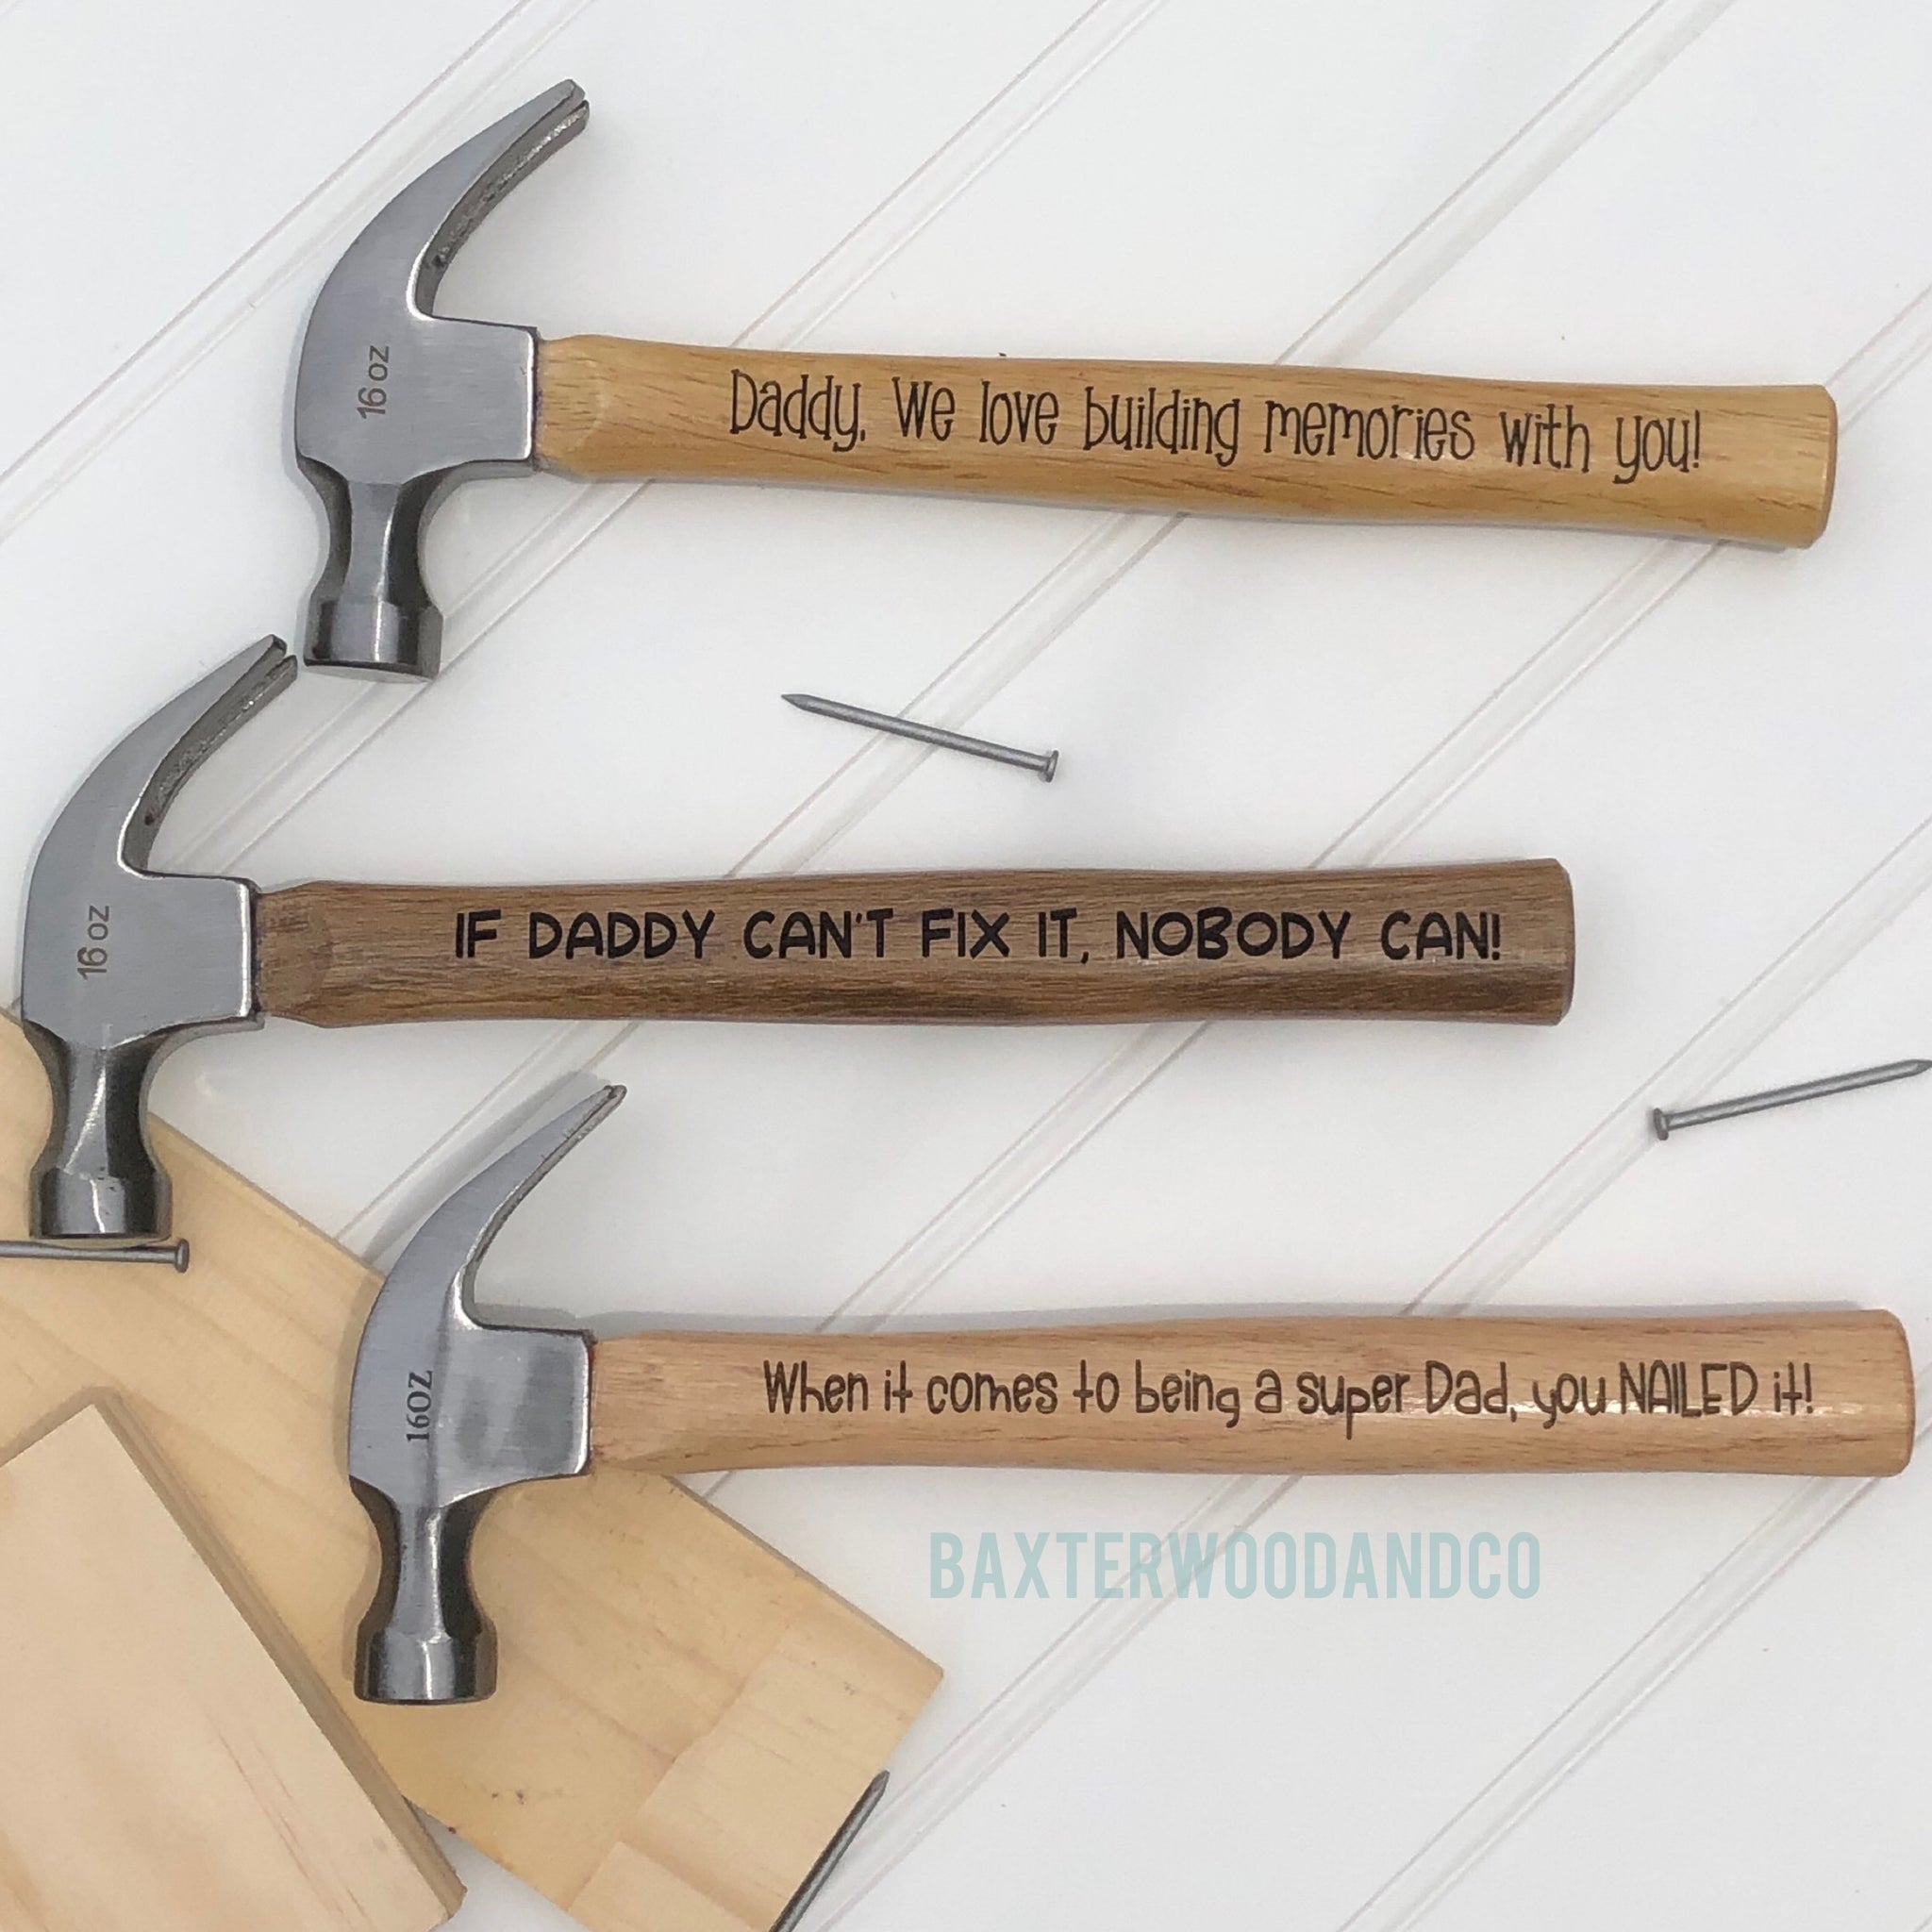 HAMMER WITH WOOD HANDLE, PERSONALIZED LASER ENGRAVED MESSAGE